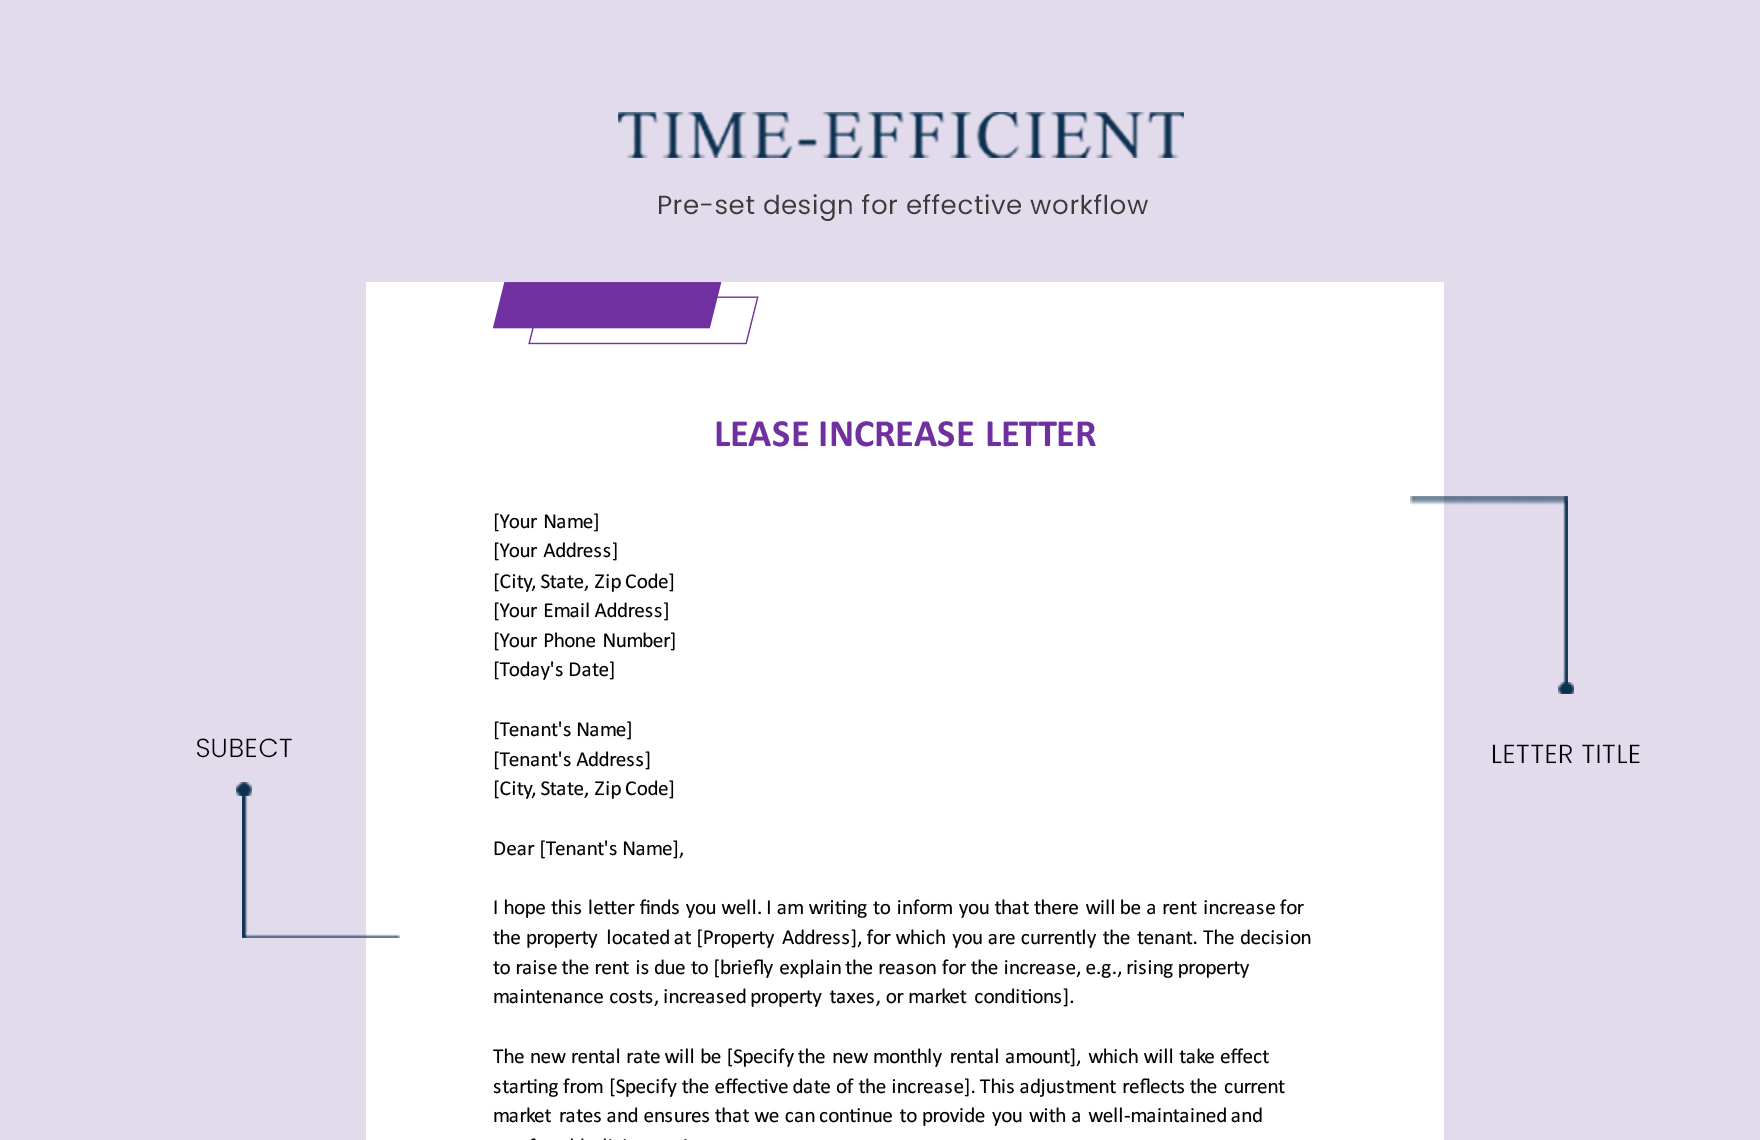 Lease Increase Letter